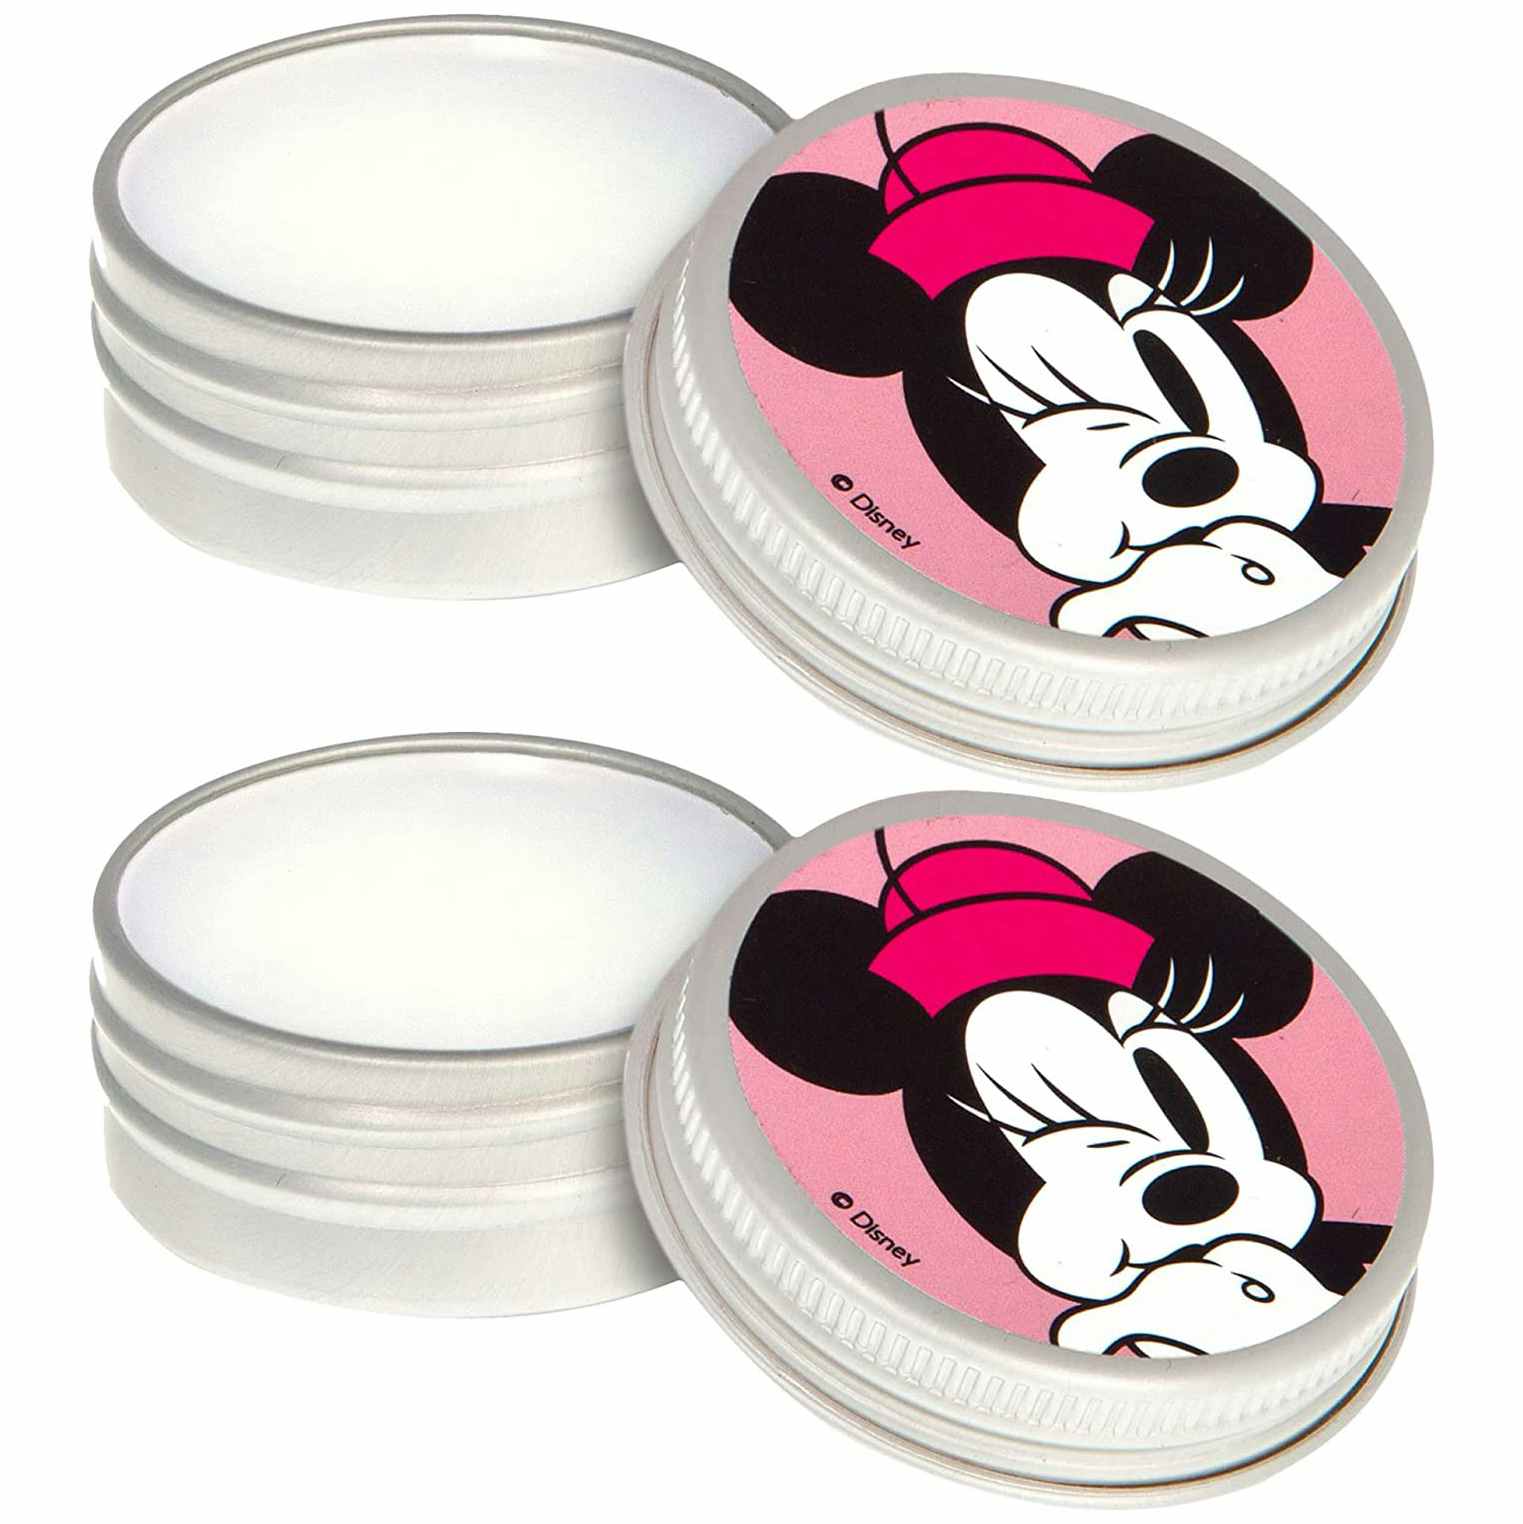 secret santa gifts - Some Minnie Mouse lip balms on a white background